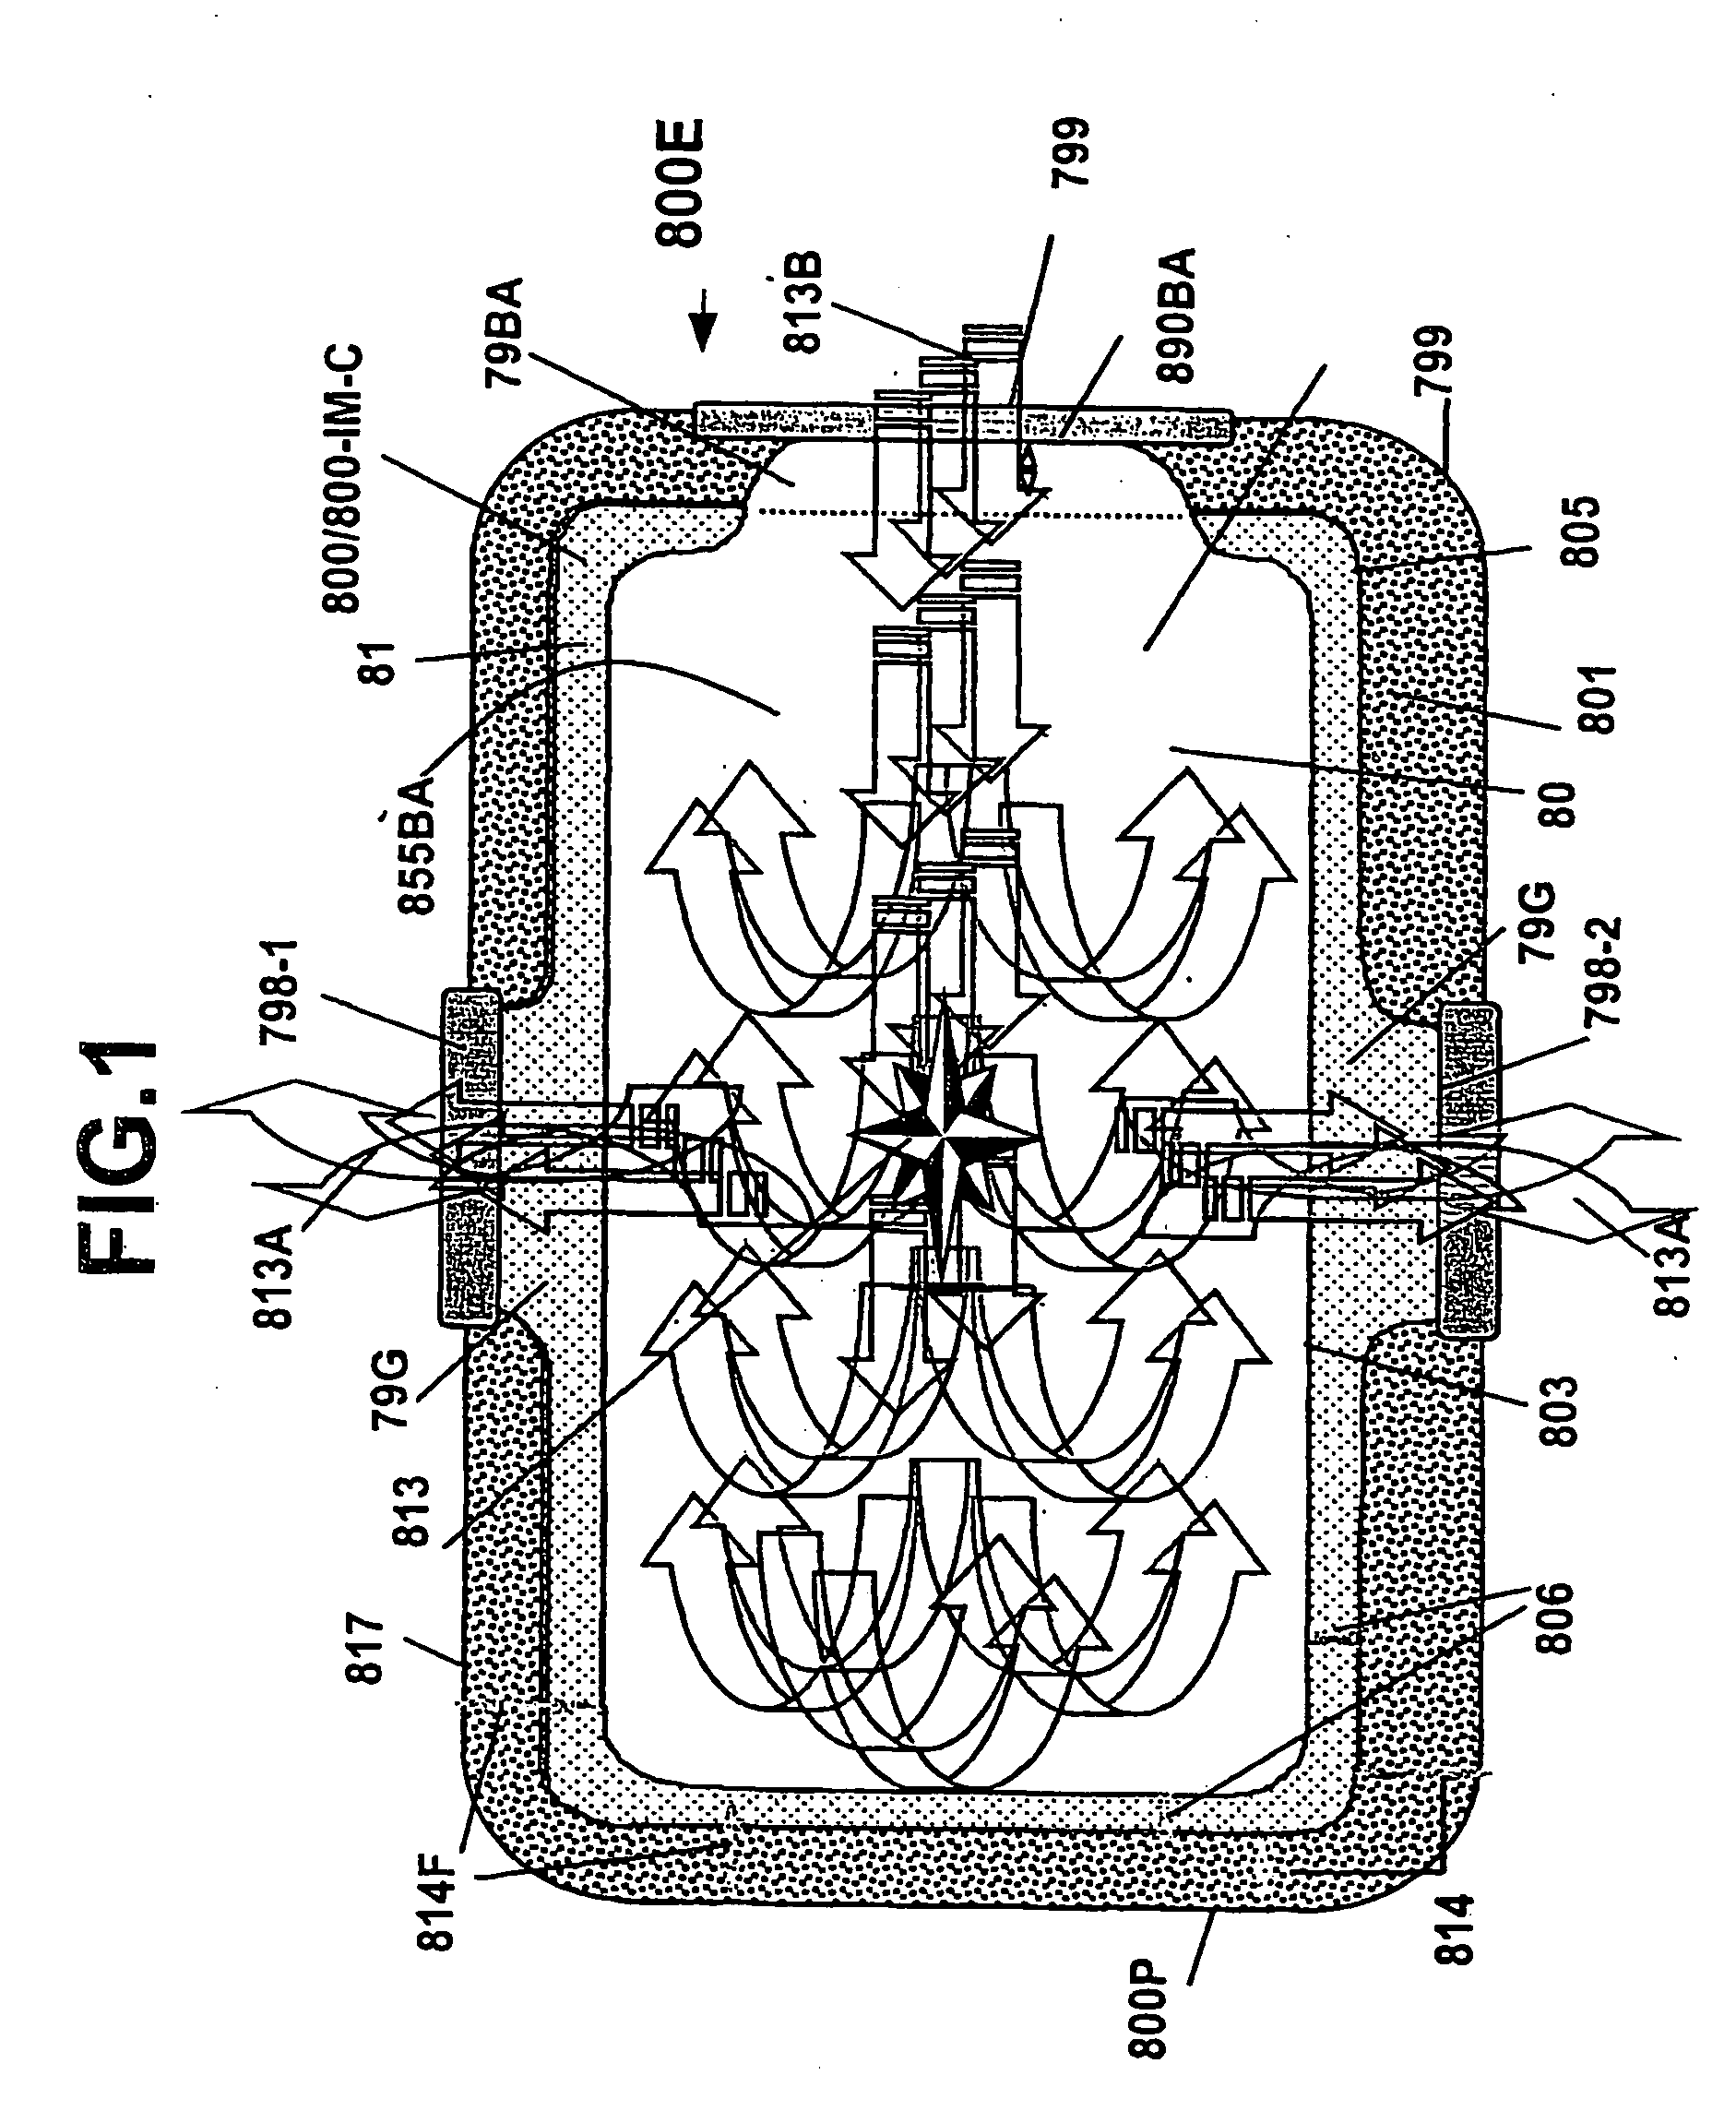 Amalgam of shielding and shielded energy pathways and other elements for single or multiple circuitries with common reference node